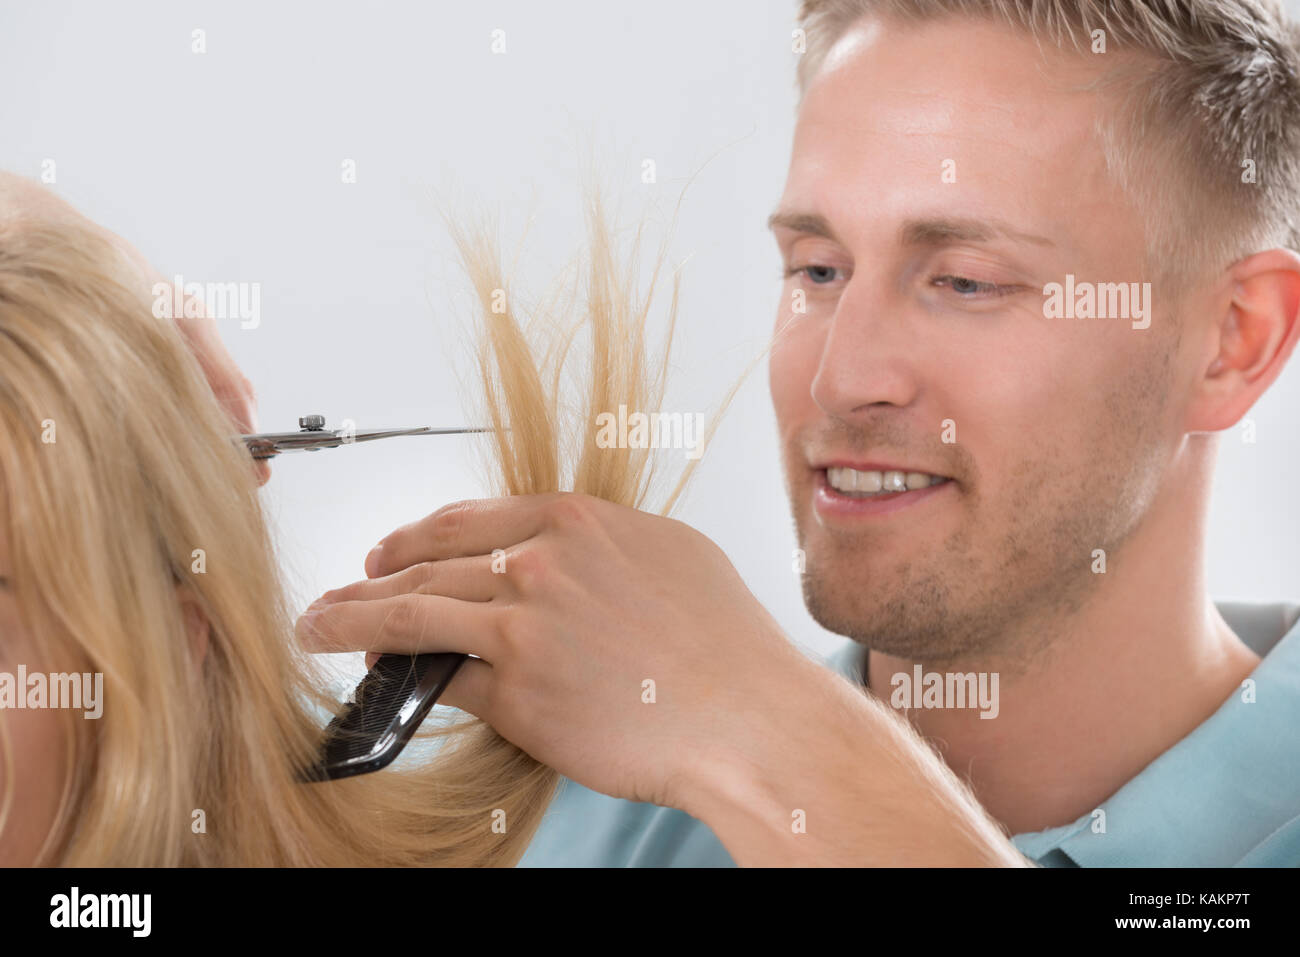 Happy young male hairdresser cutting customer's hair at salon Stock Photo